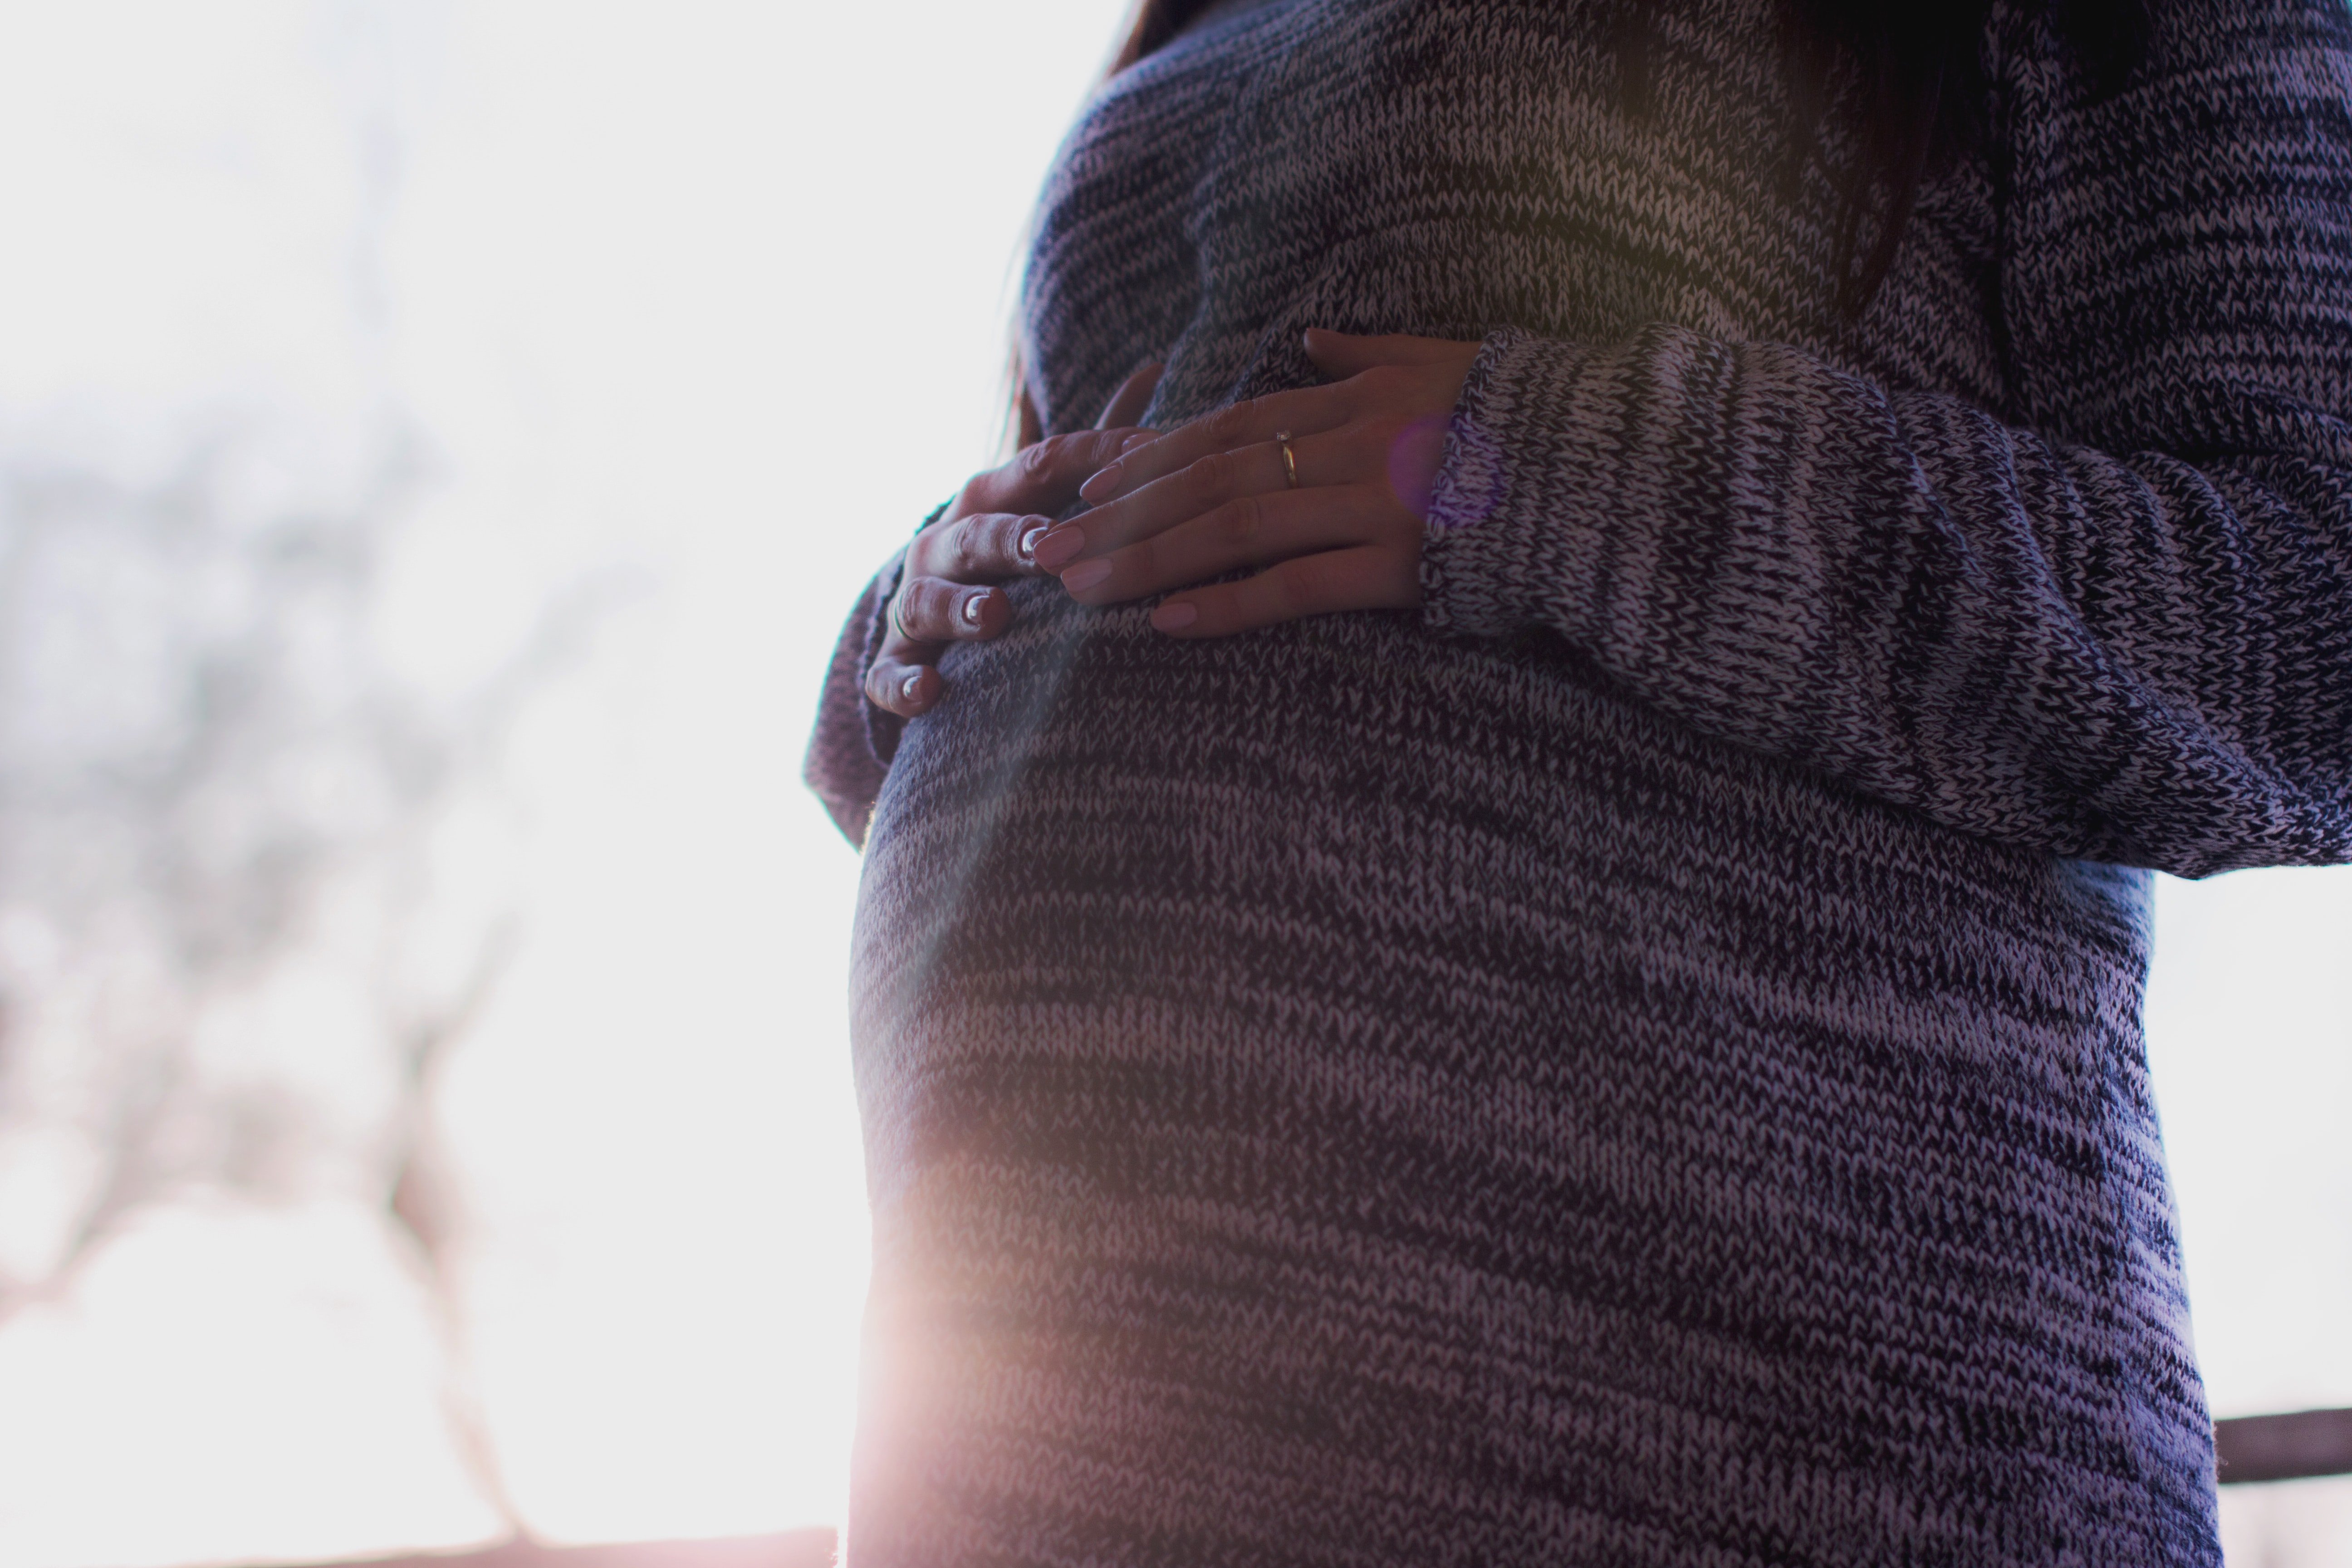 Woman holding her pregnant belly | Source: Unsplash / freestocks